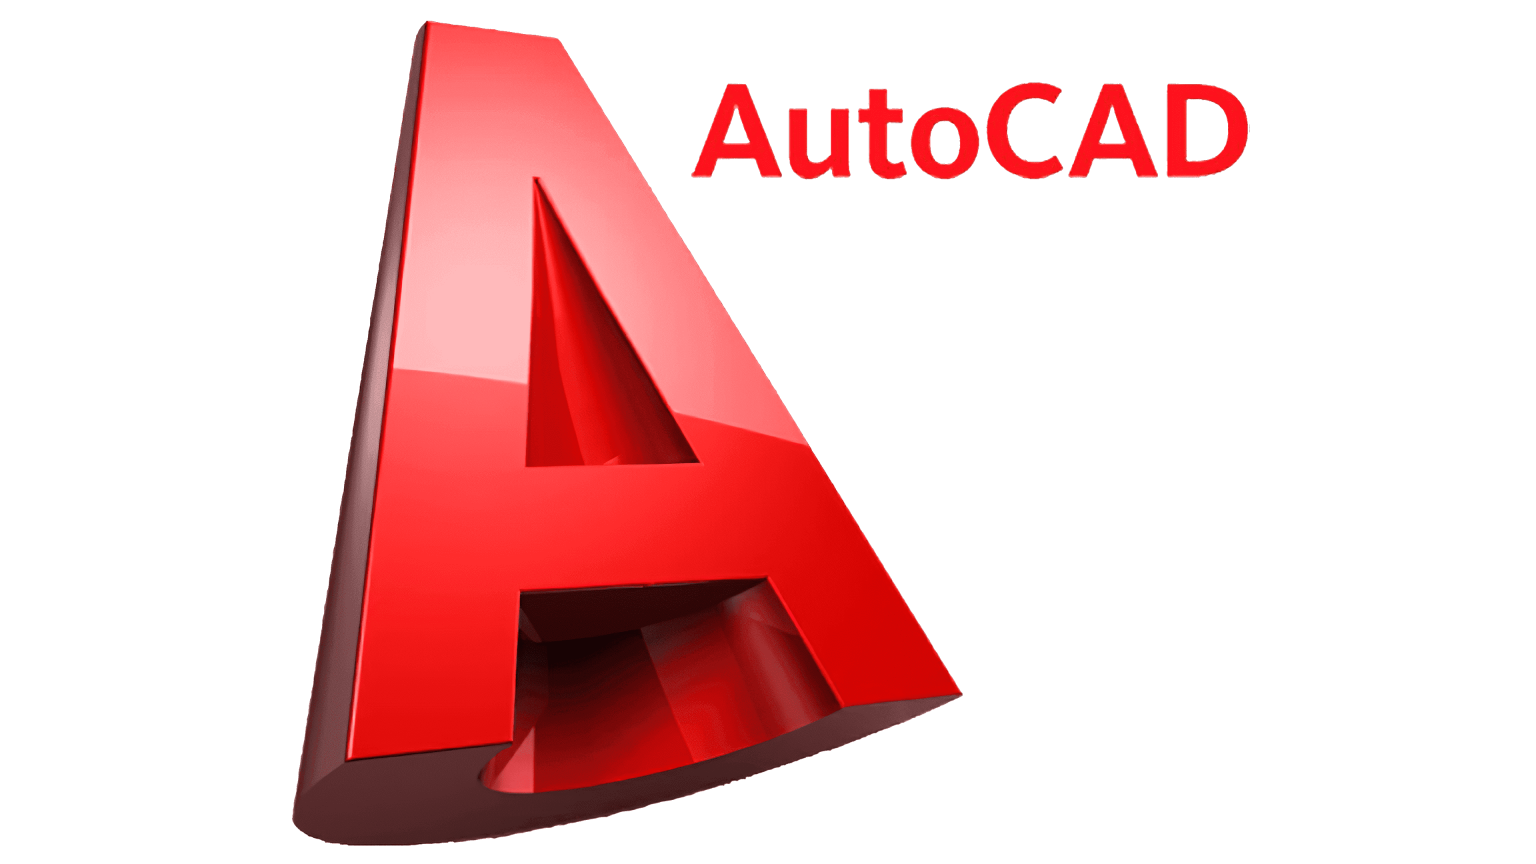 Autocad Logo and symbol, meaning, history, sign.